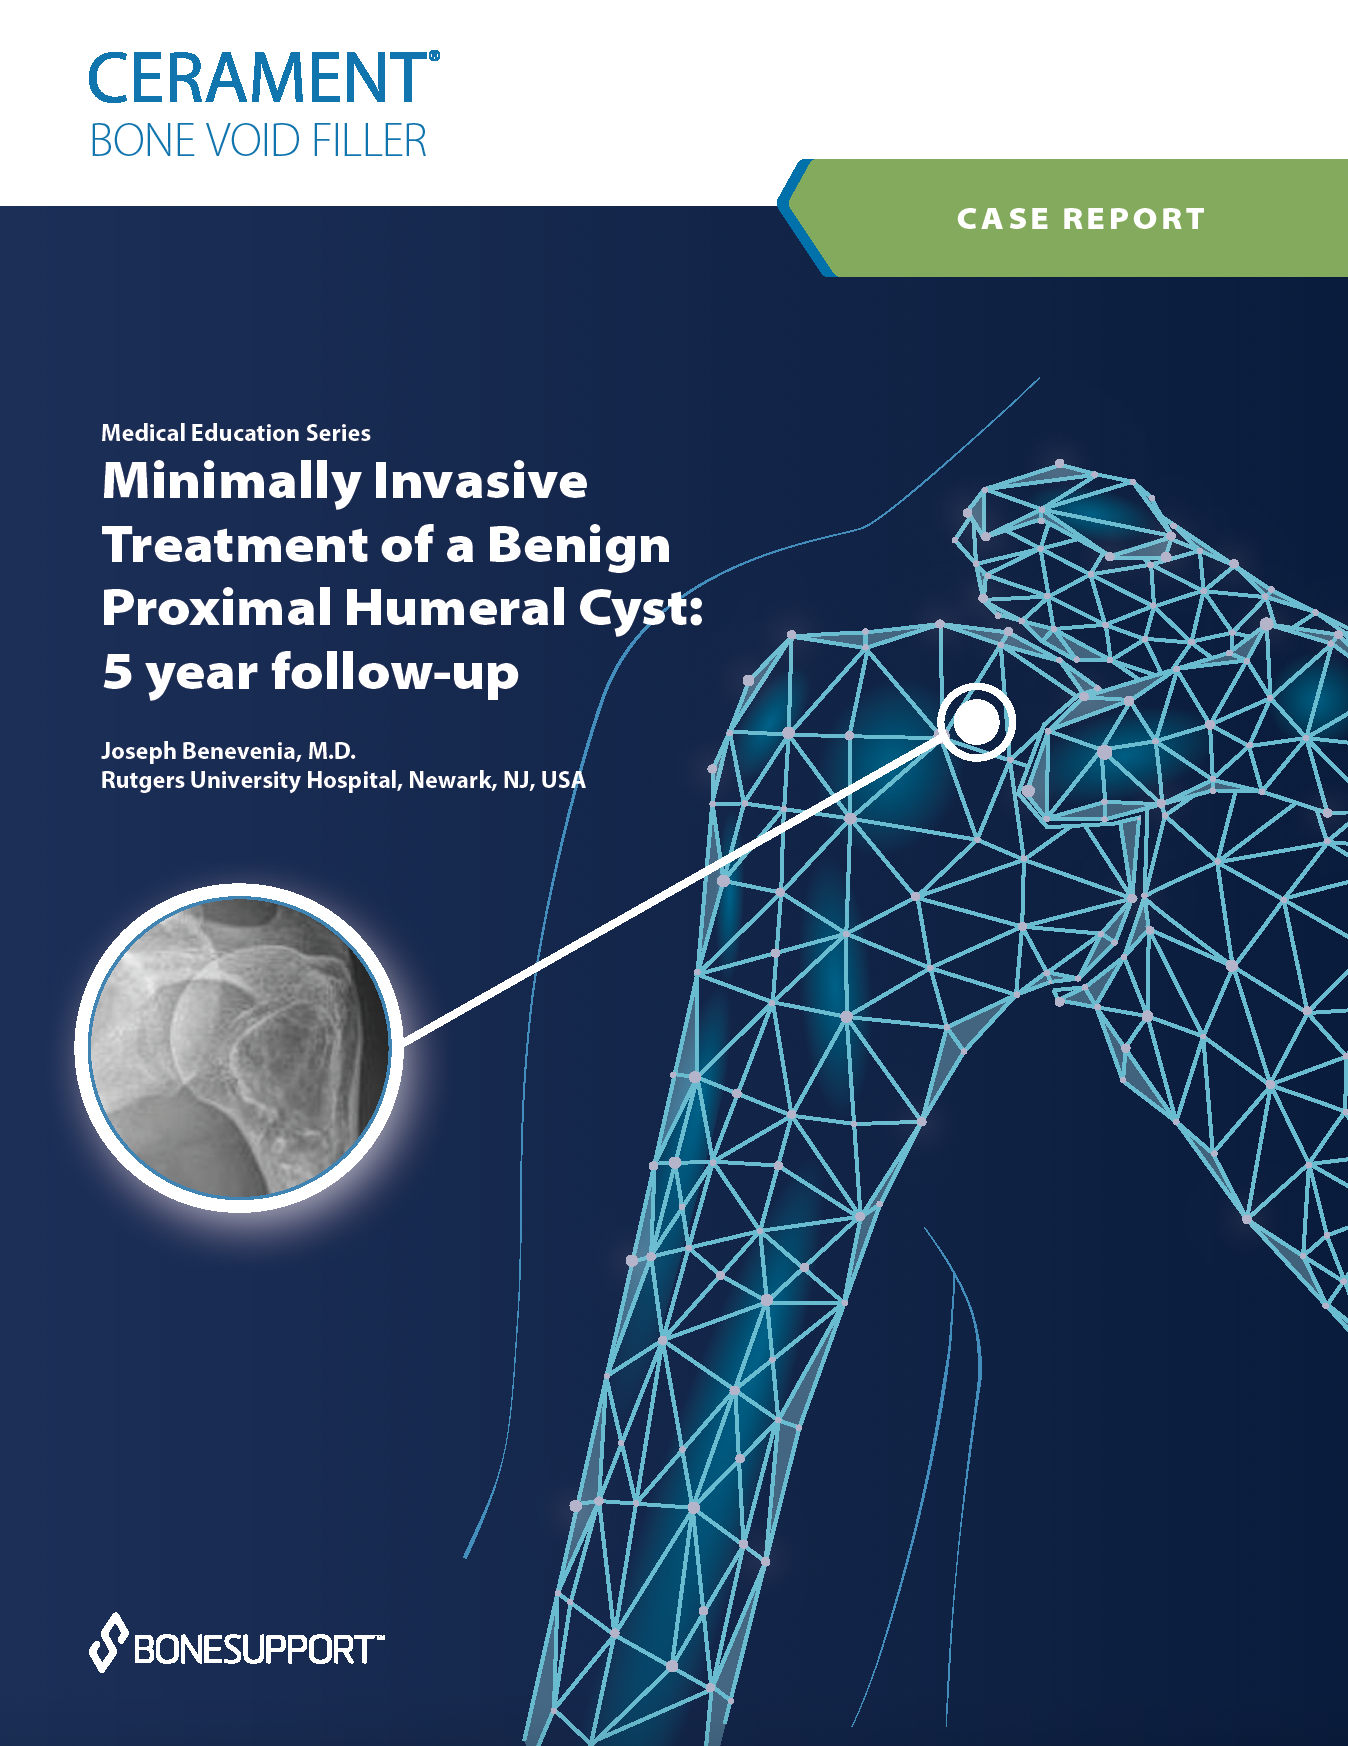 Minimally invasive treatment of a benign proximal humeral cyst with CERAMENT BONE VOID FILLER: 5 year follow-up